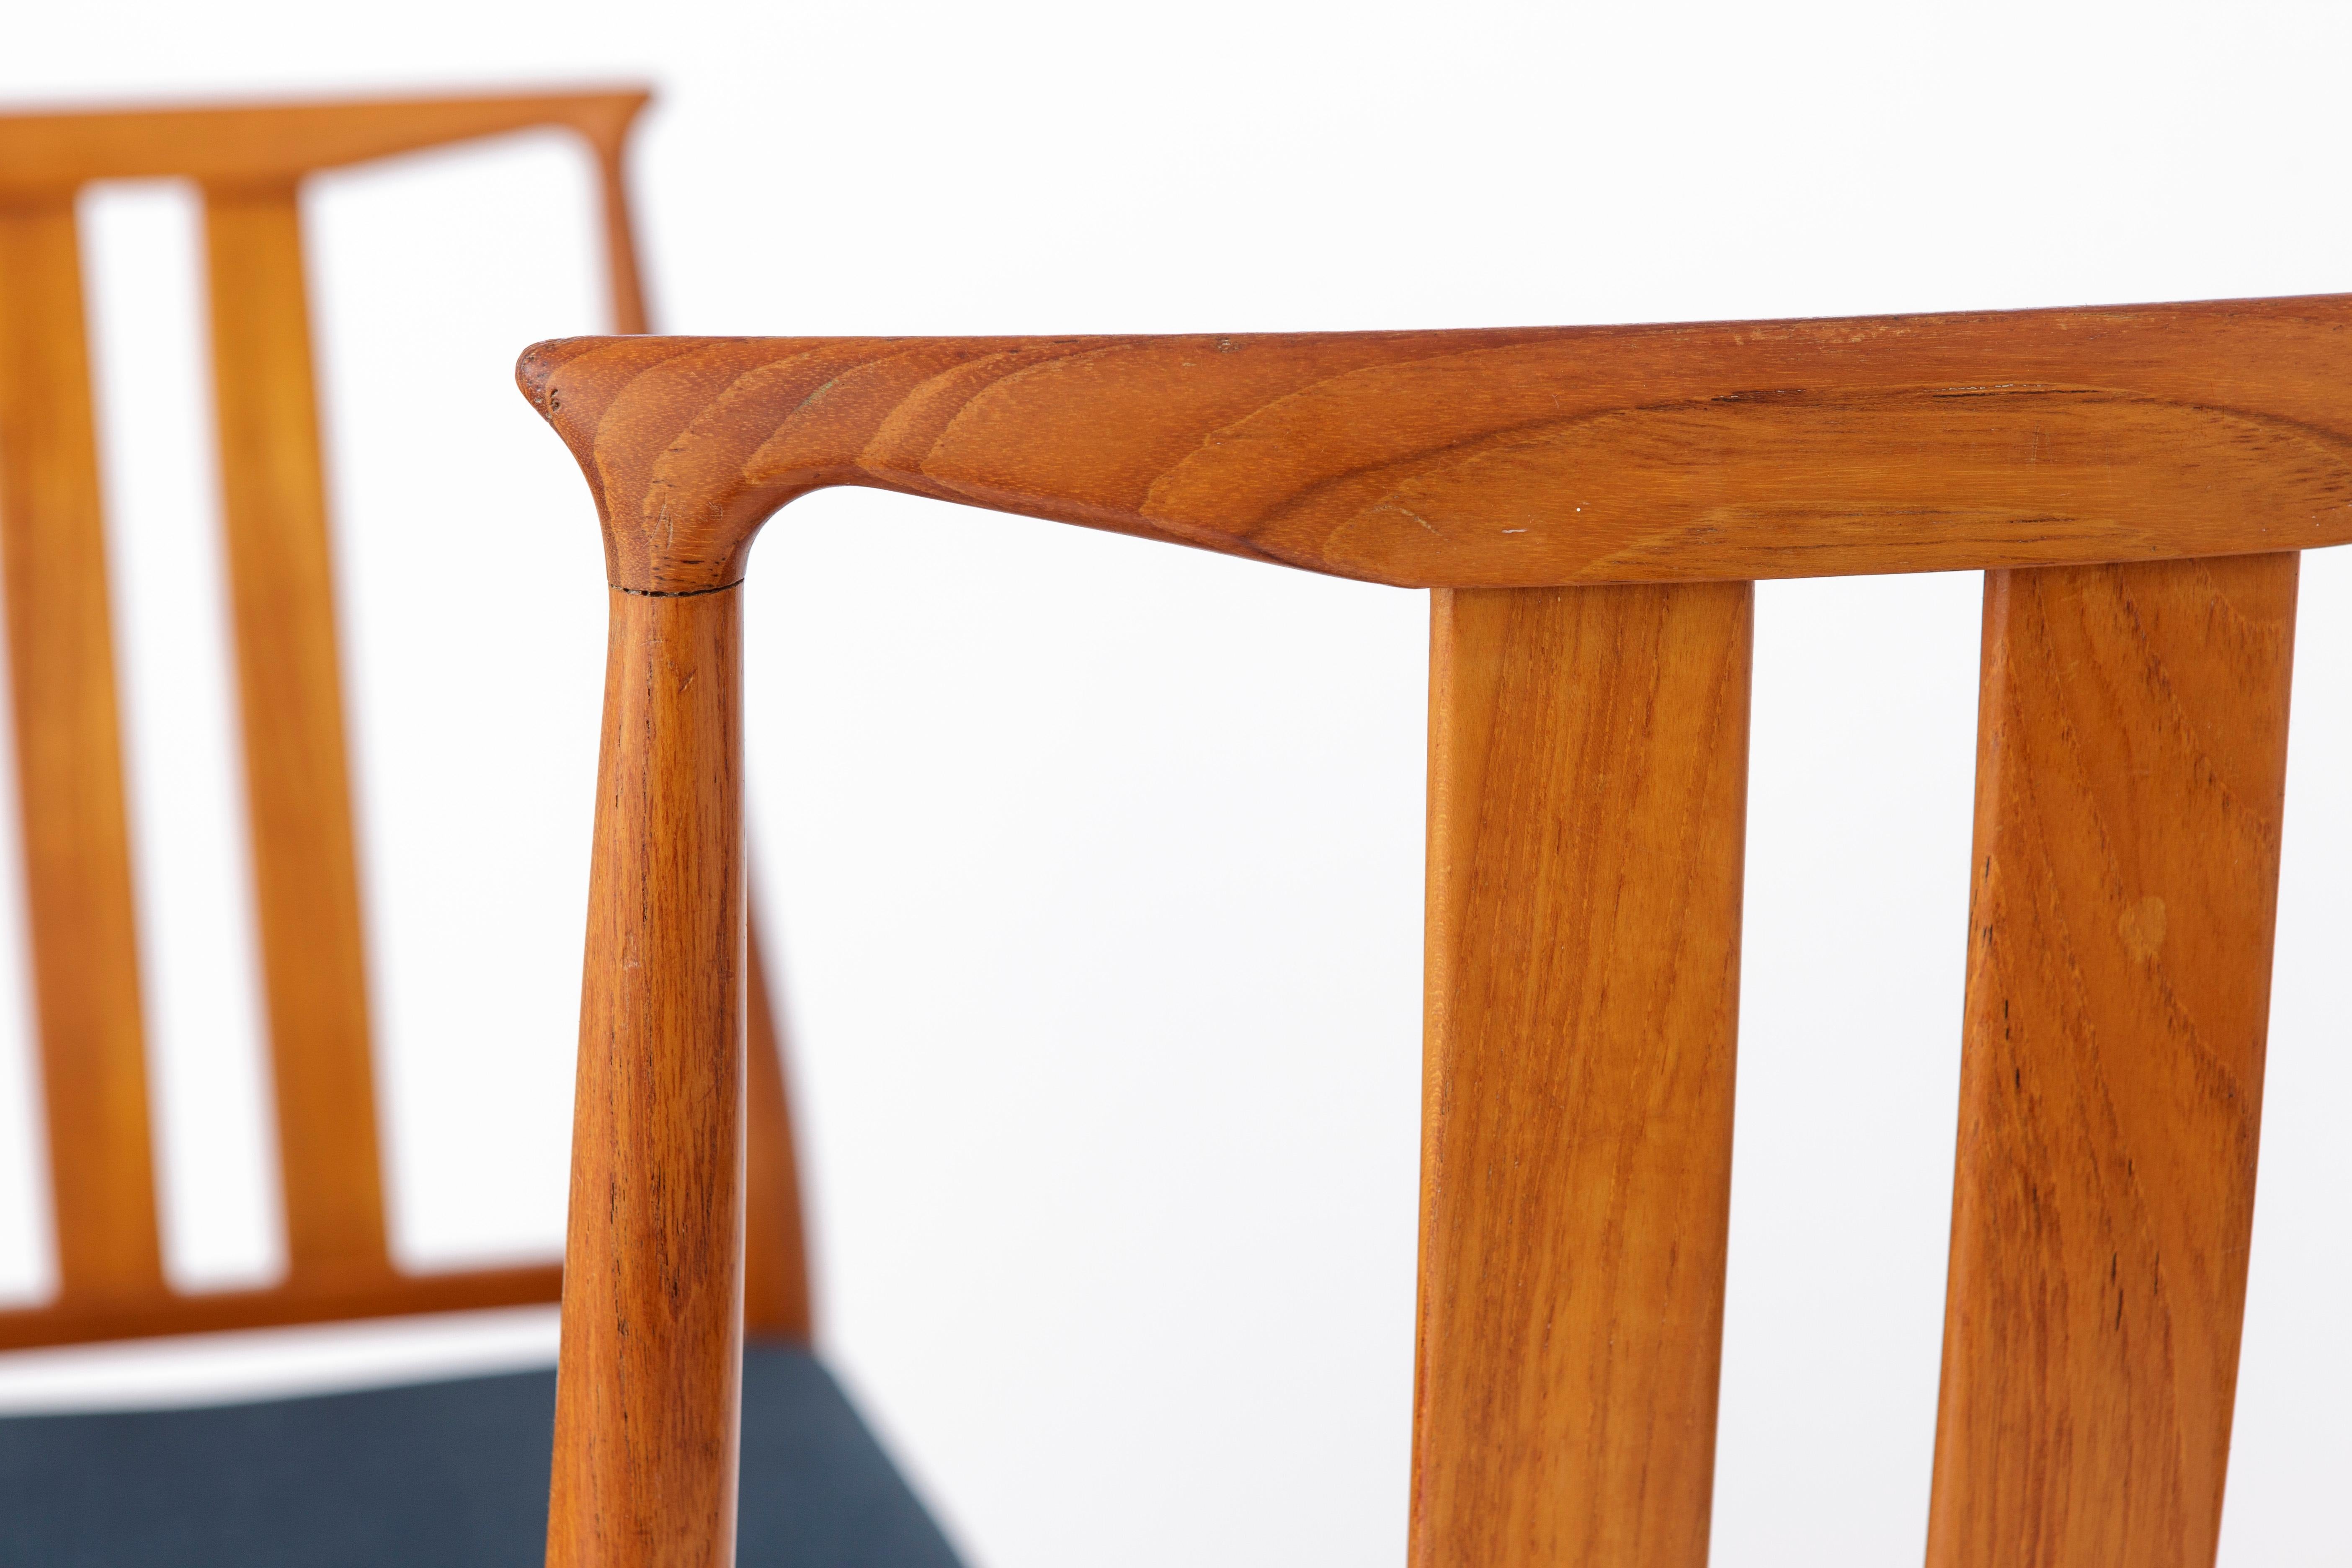 4 Vintage Dining Chairs, 1960s, Danish, Teak For Sale 2